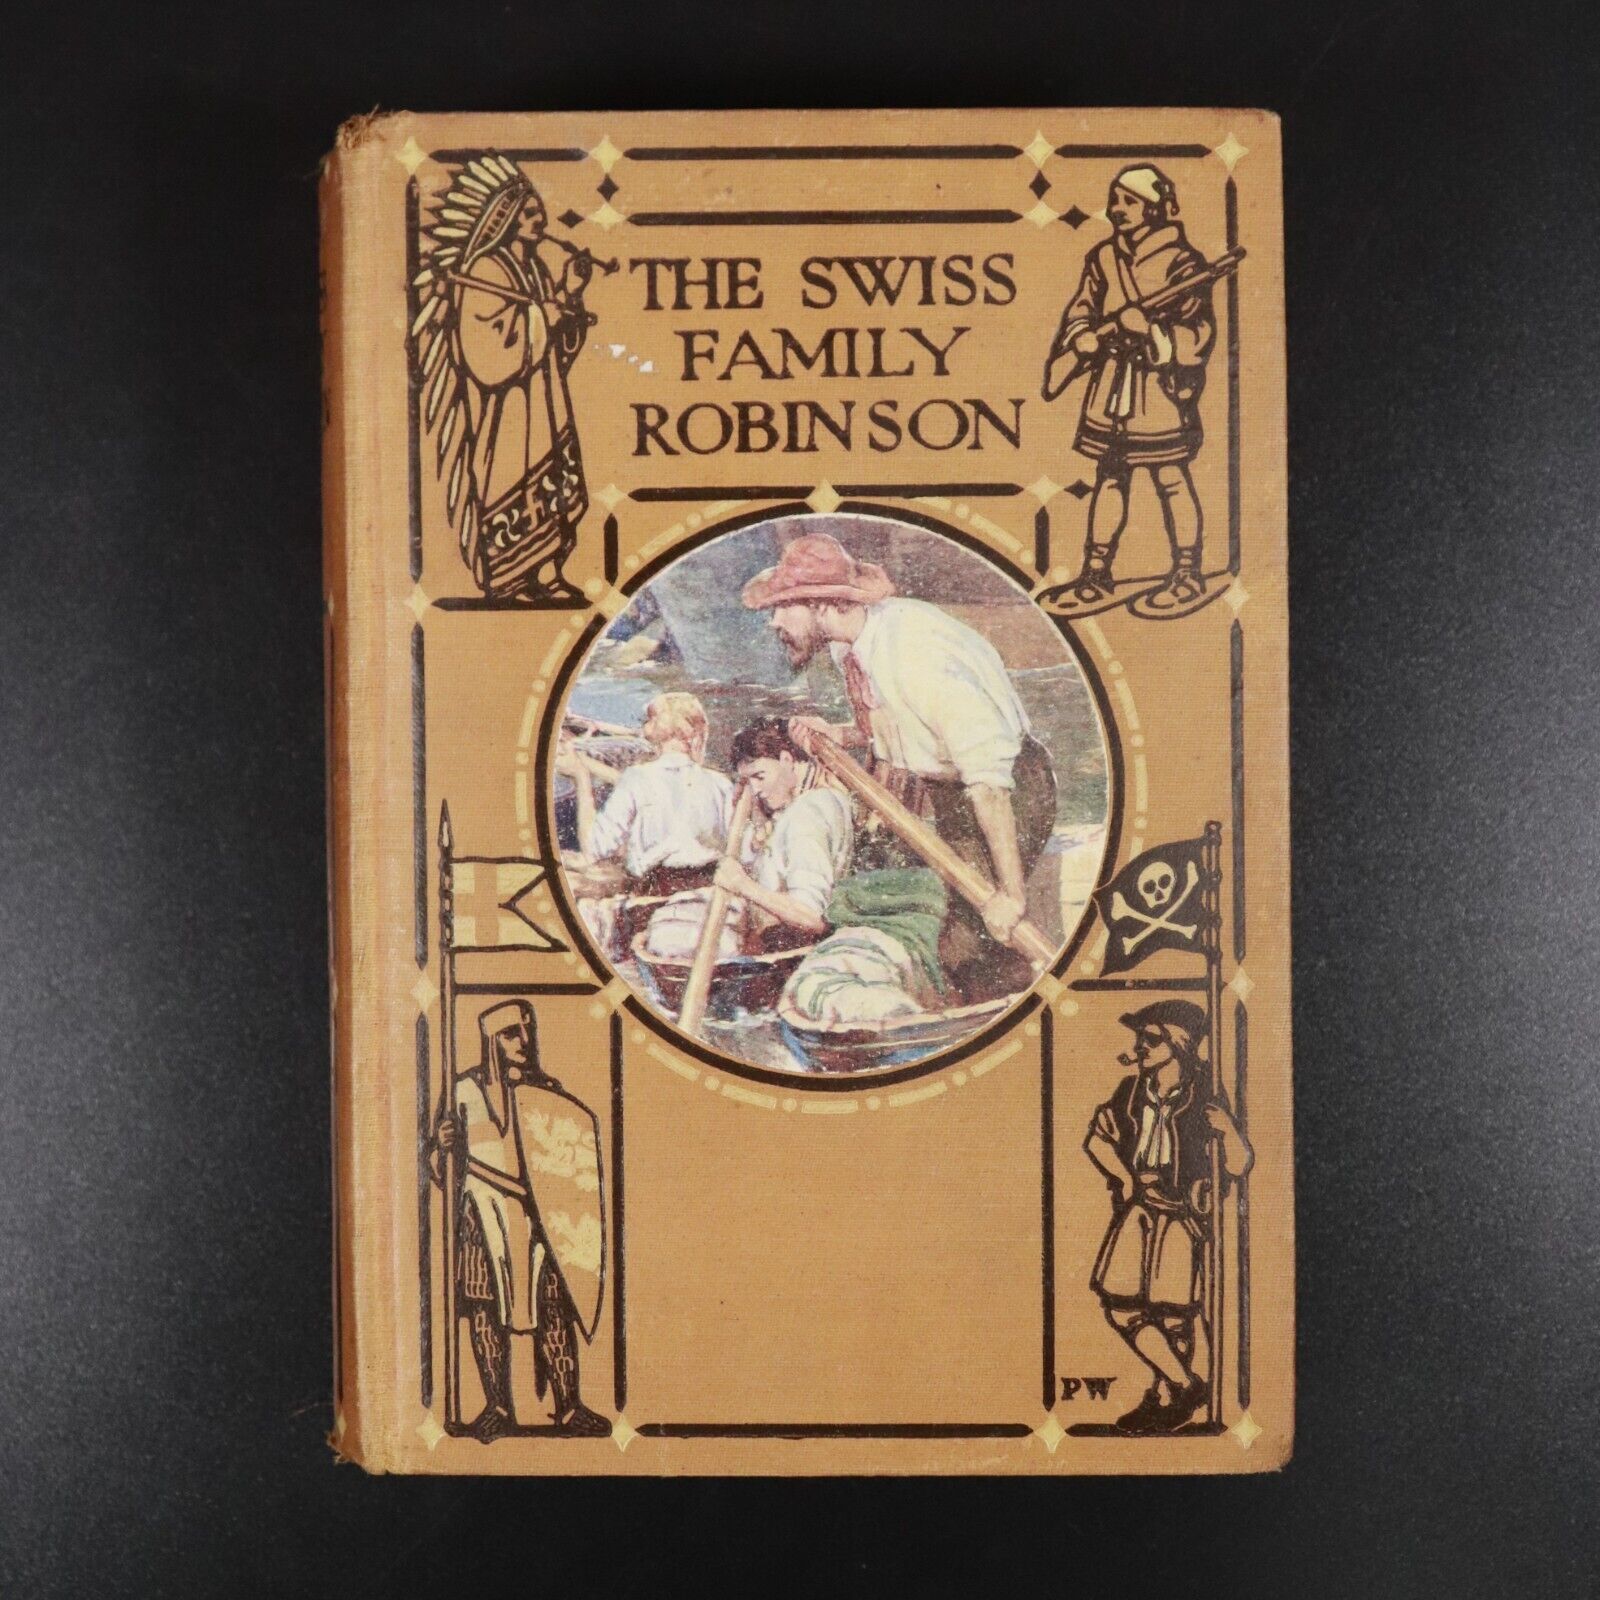 c1910 The Swiss Family Robinson by J.D. Wyss Classic Adventure Fiction Book